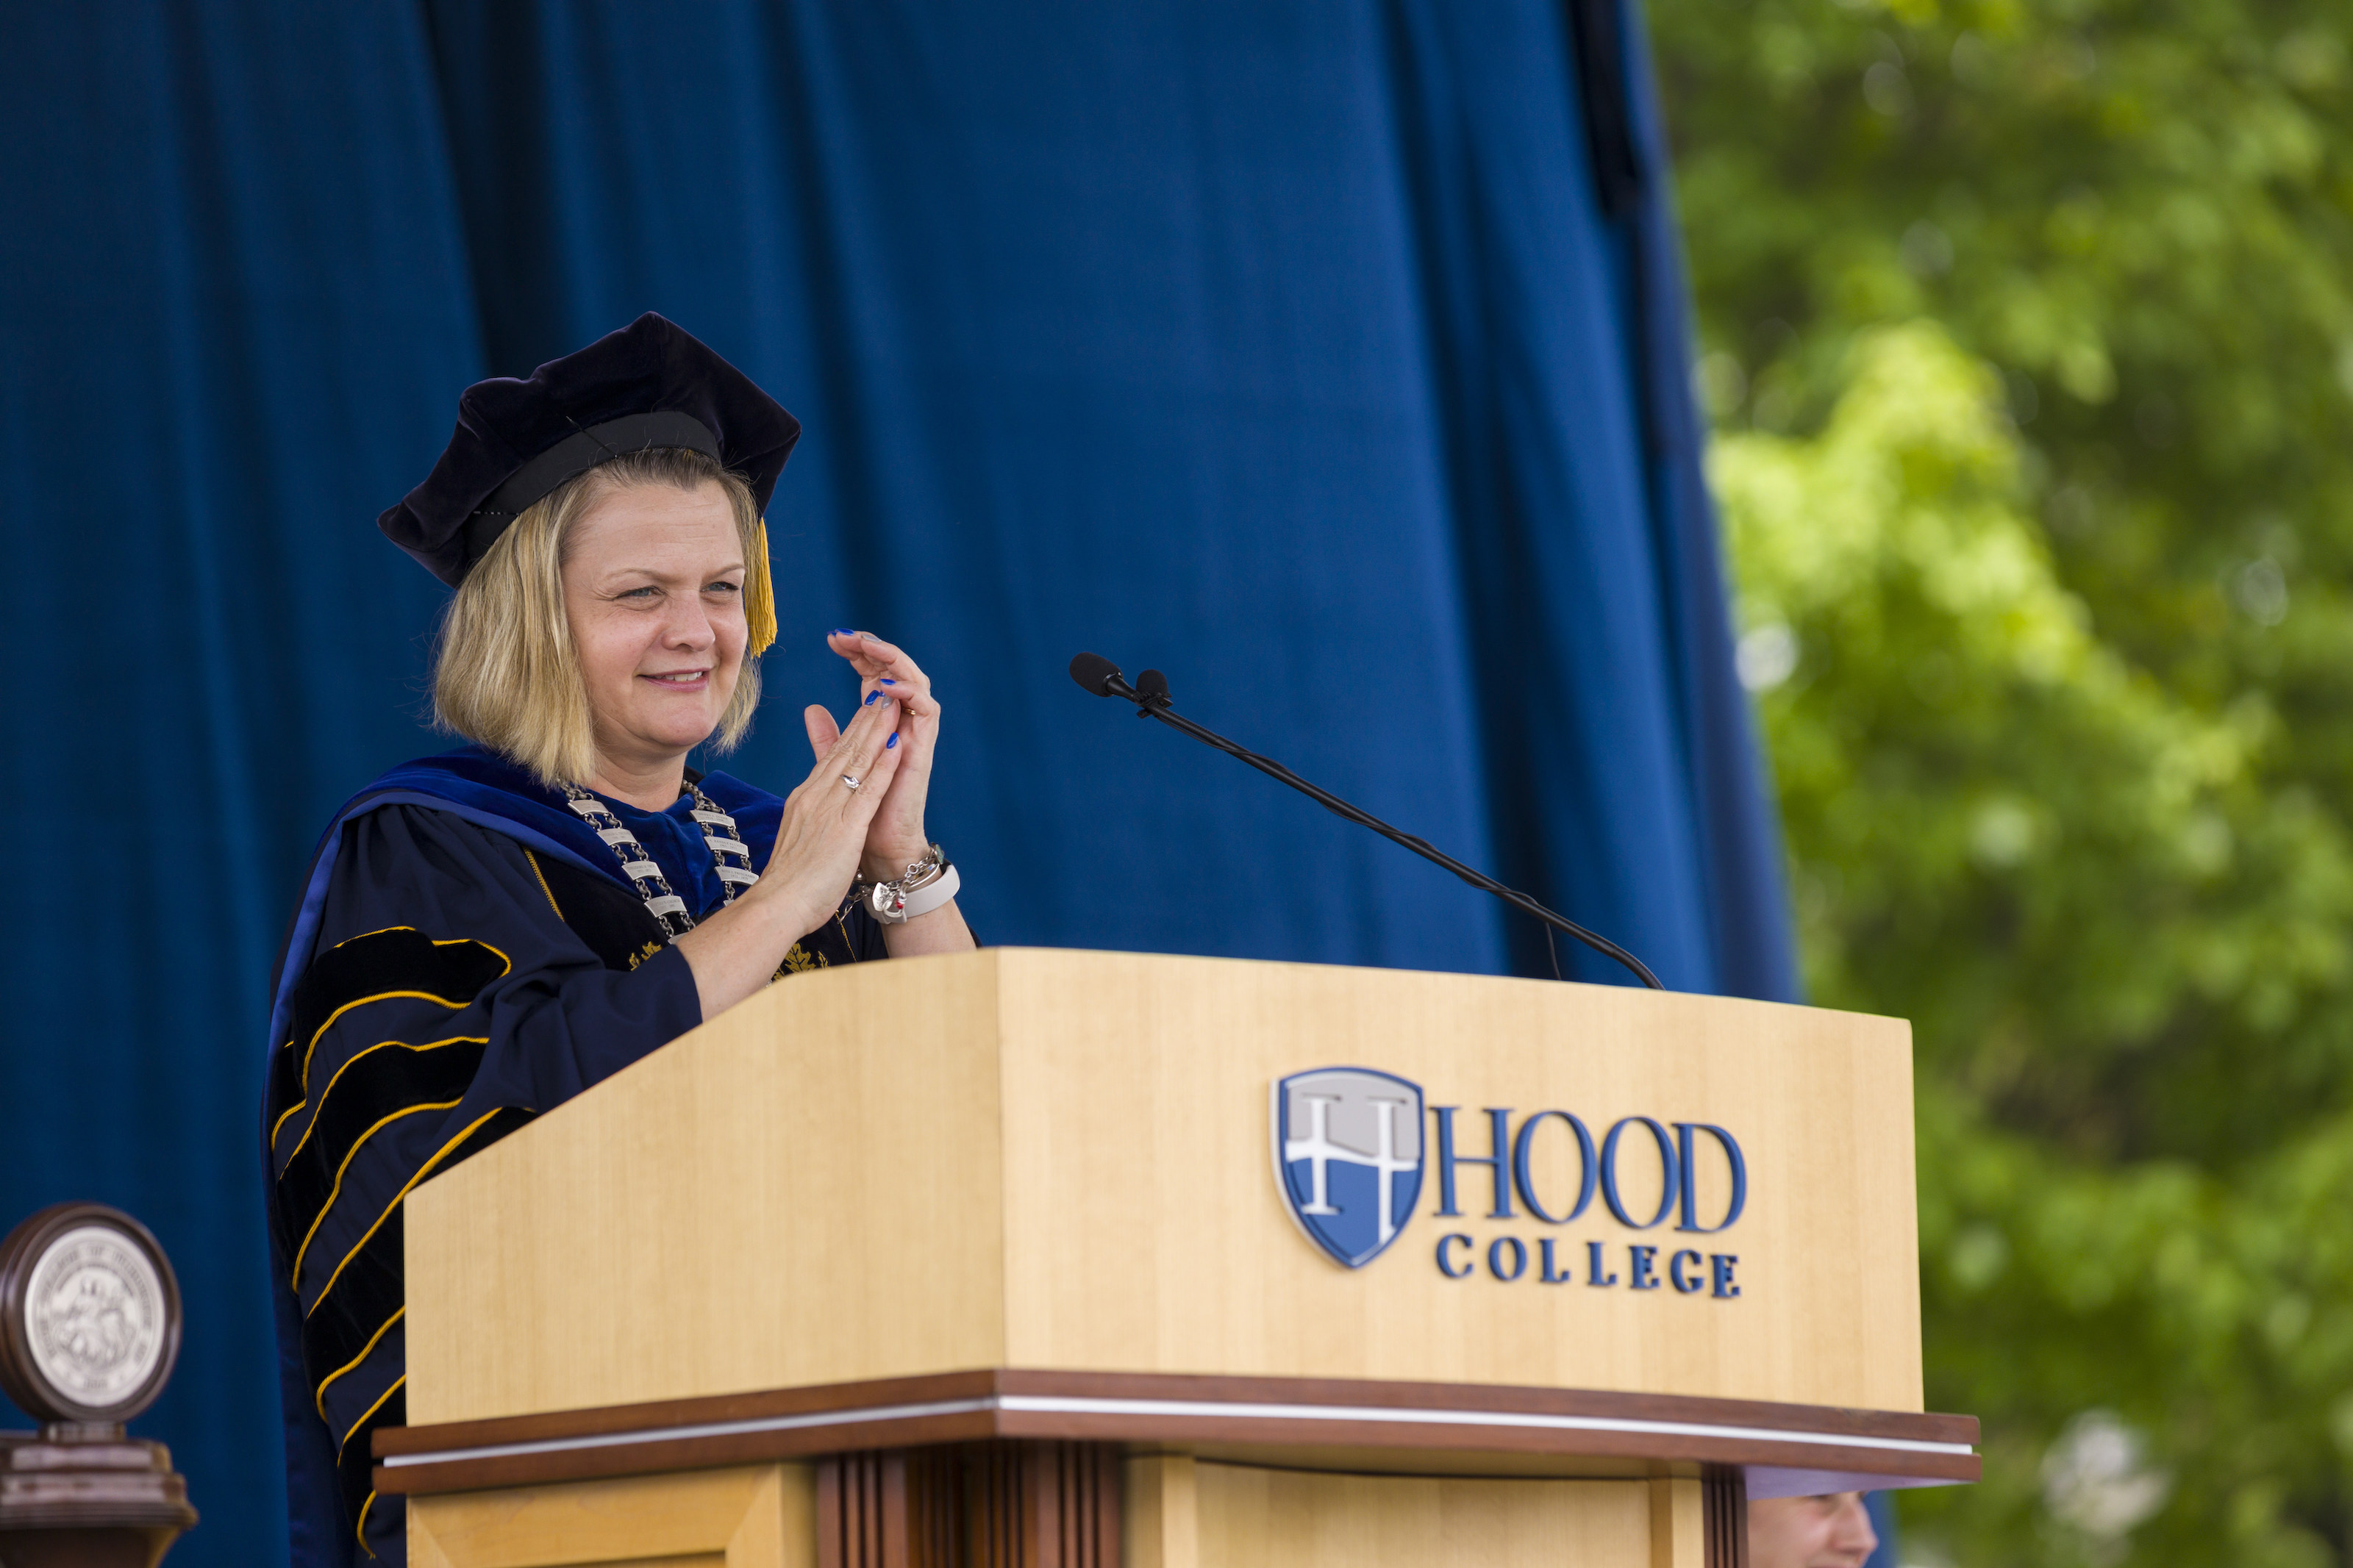 Hood College President Andrea E. Chapdelaine claps as she issues remarks from the podium at the class of 2021 graduation ceremony